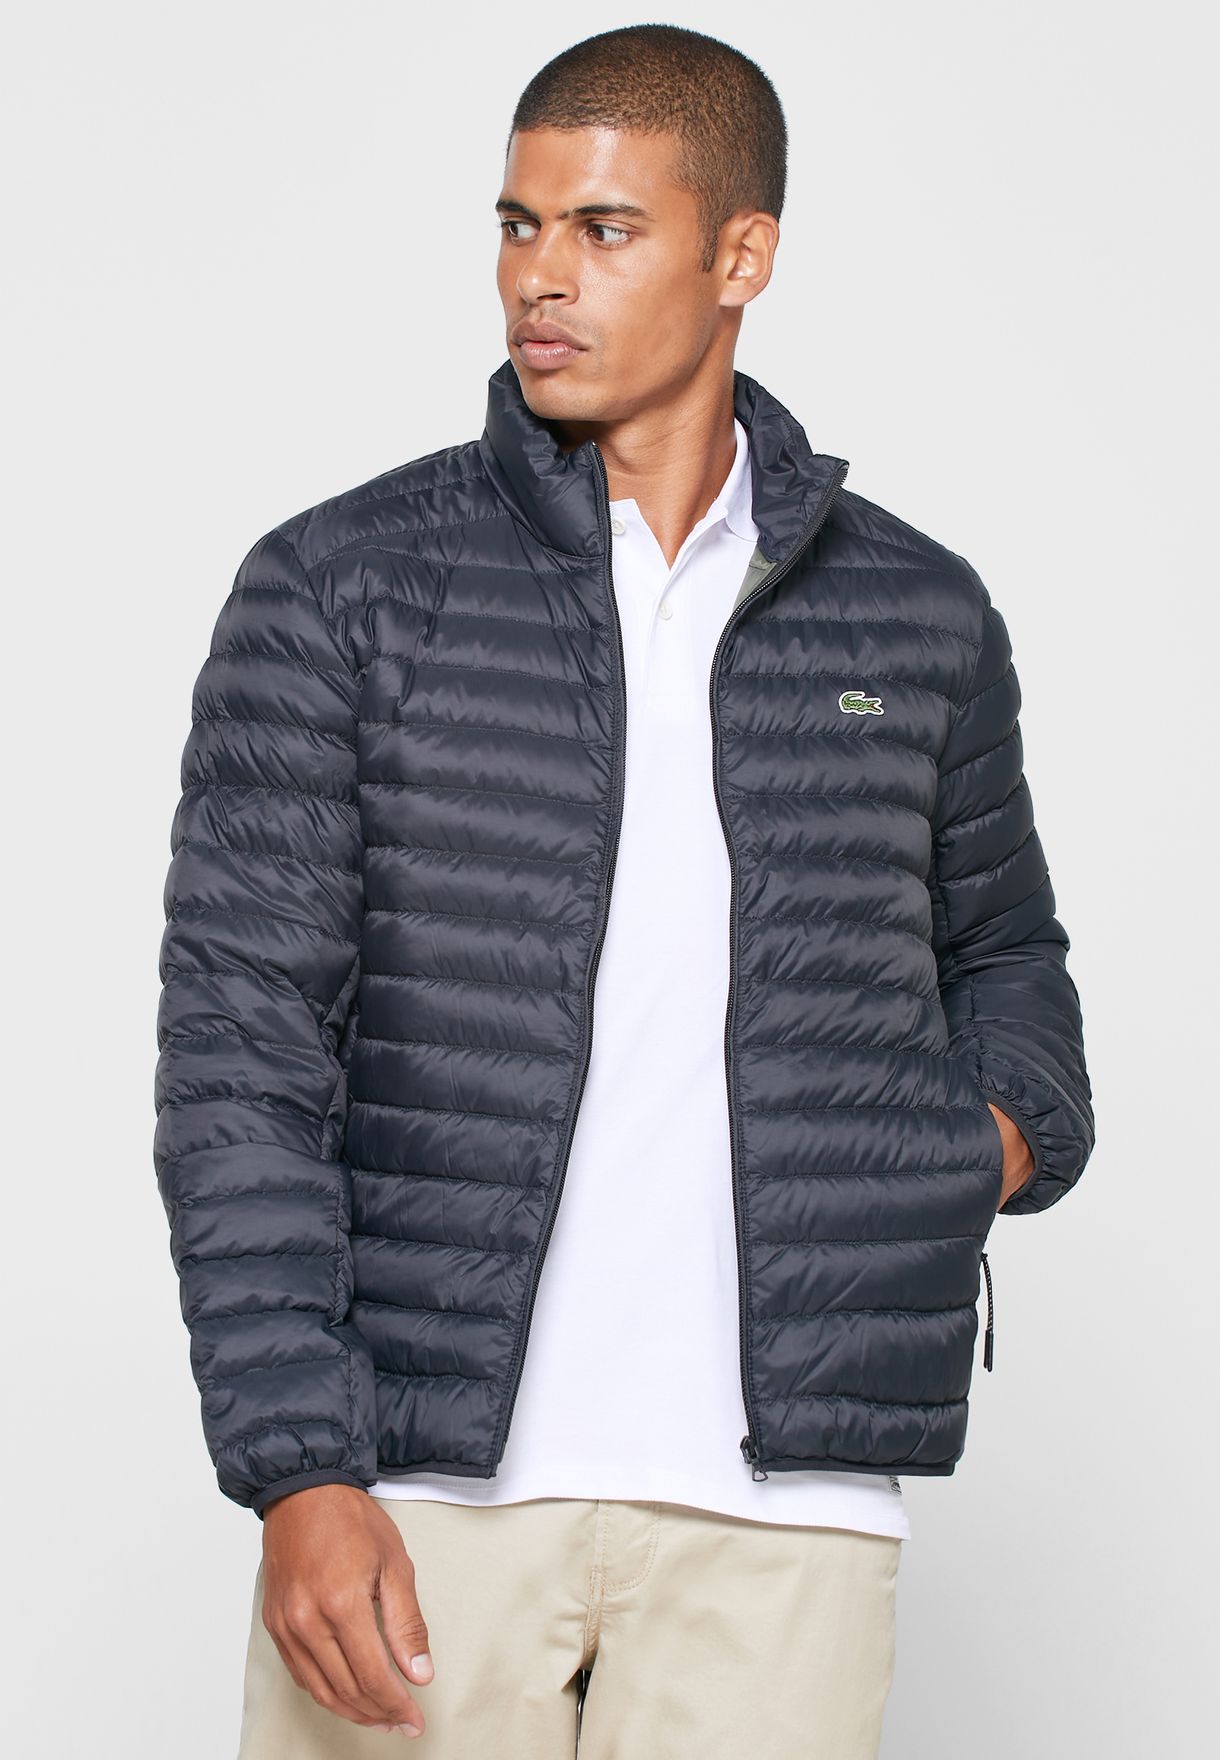 lacoste quilted jacket